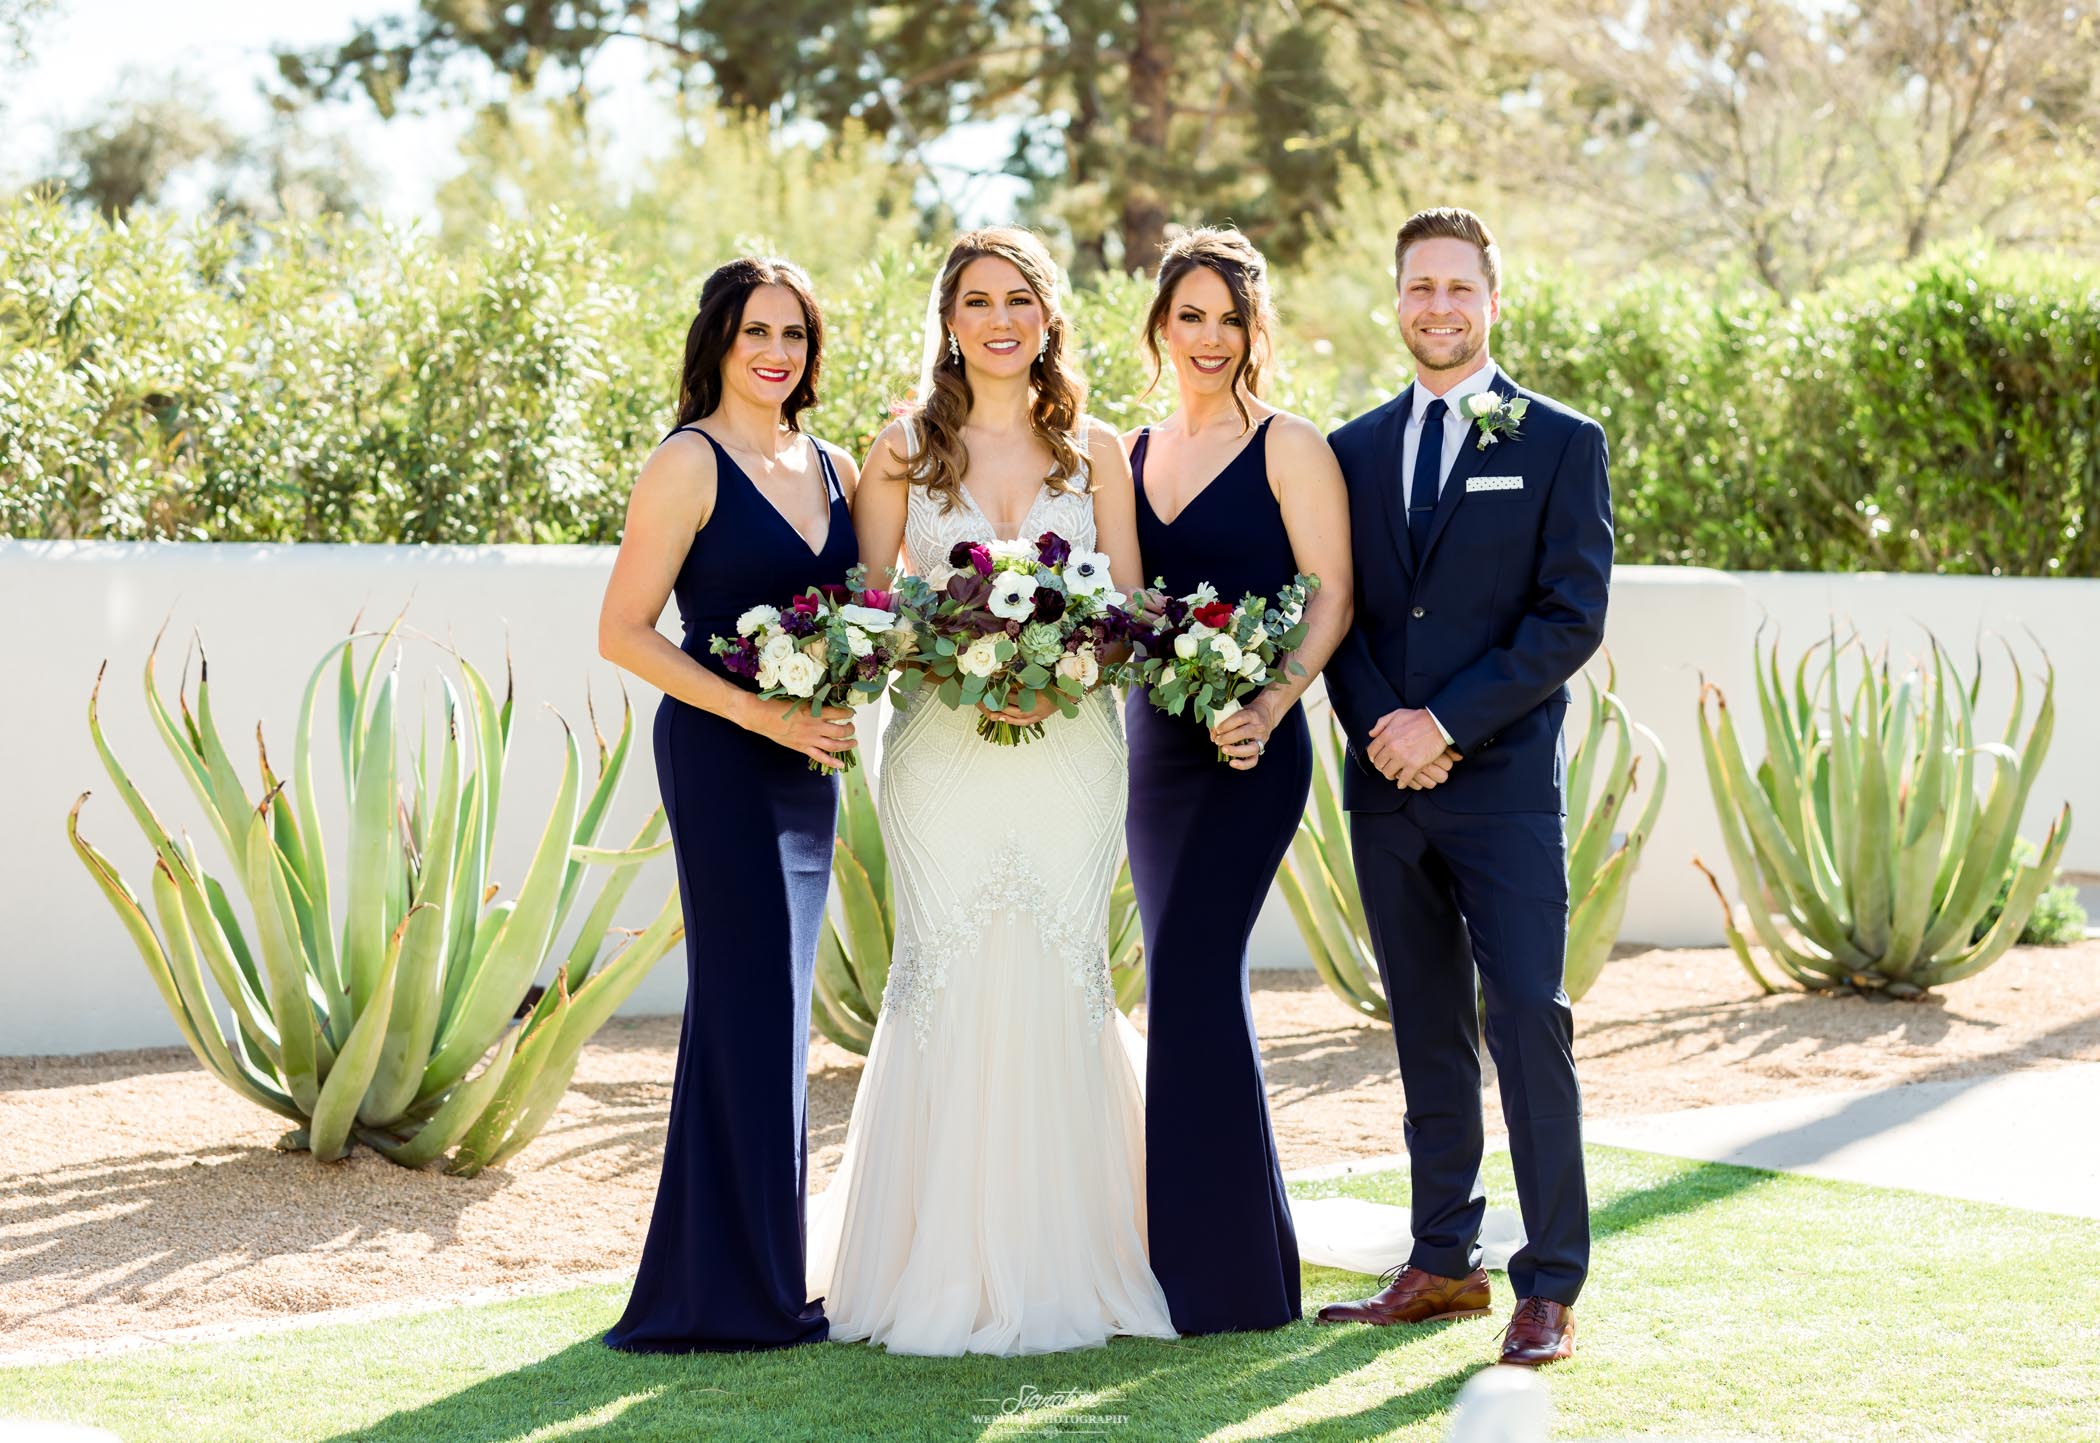 Bride with bridal party smiling outside